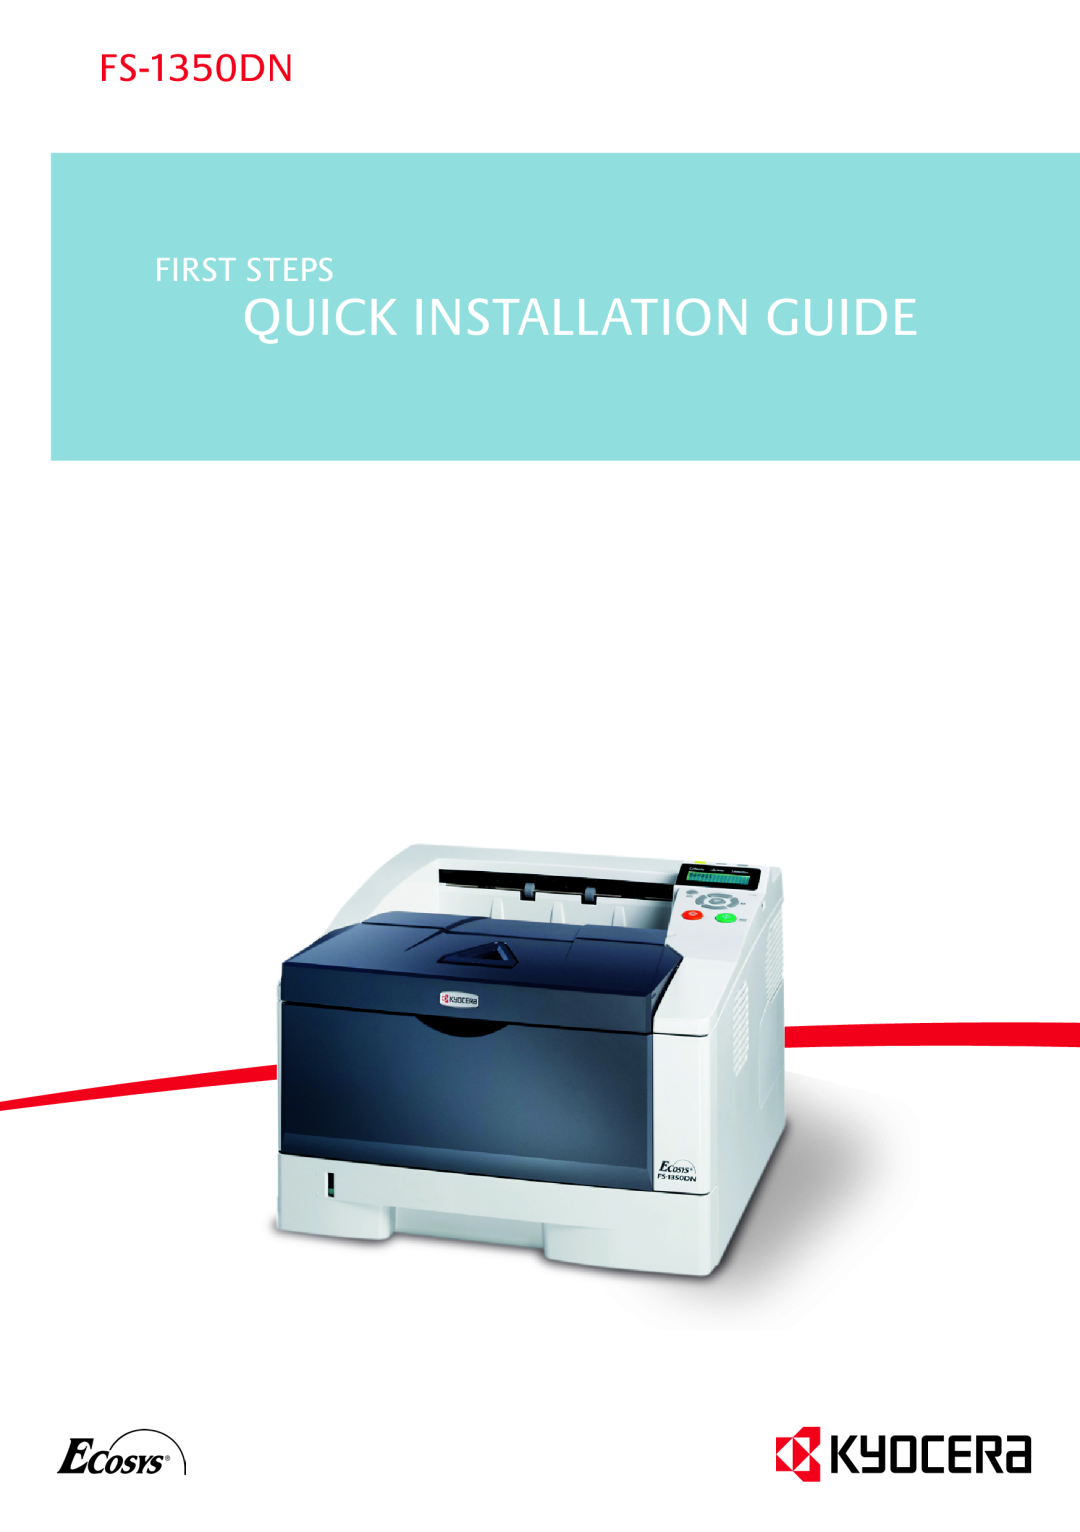 Kyocera FS-1350DN manual Quick Installation Guide, First Steps 